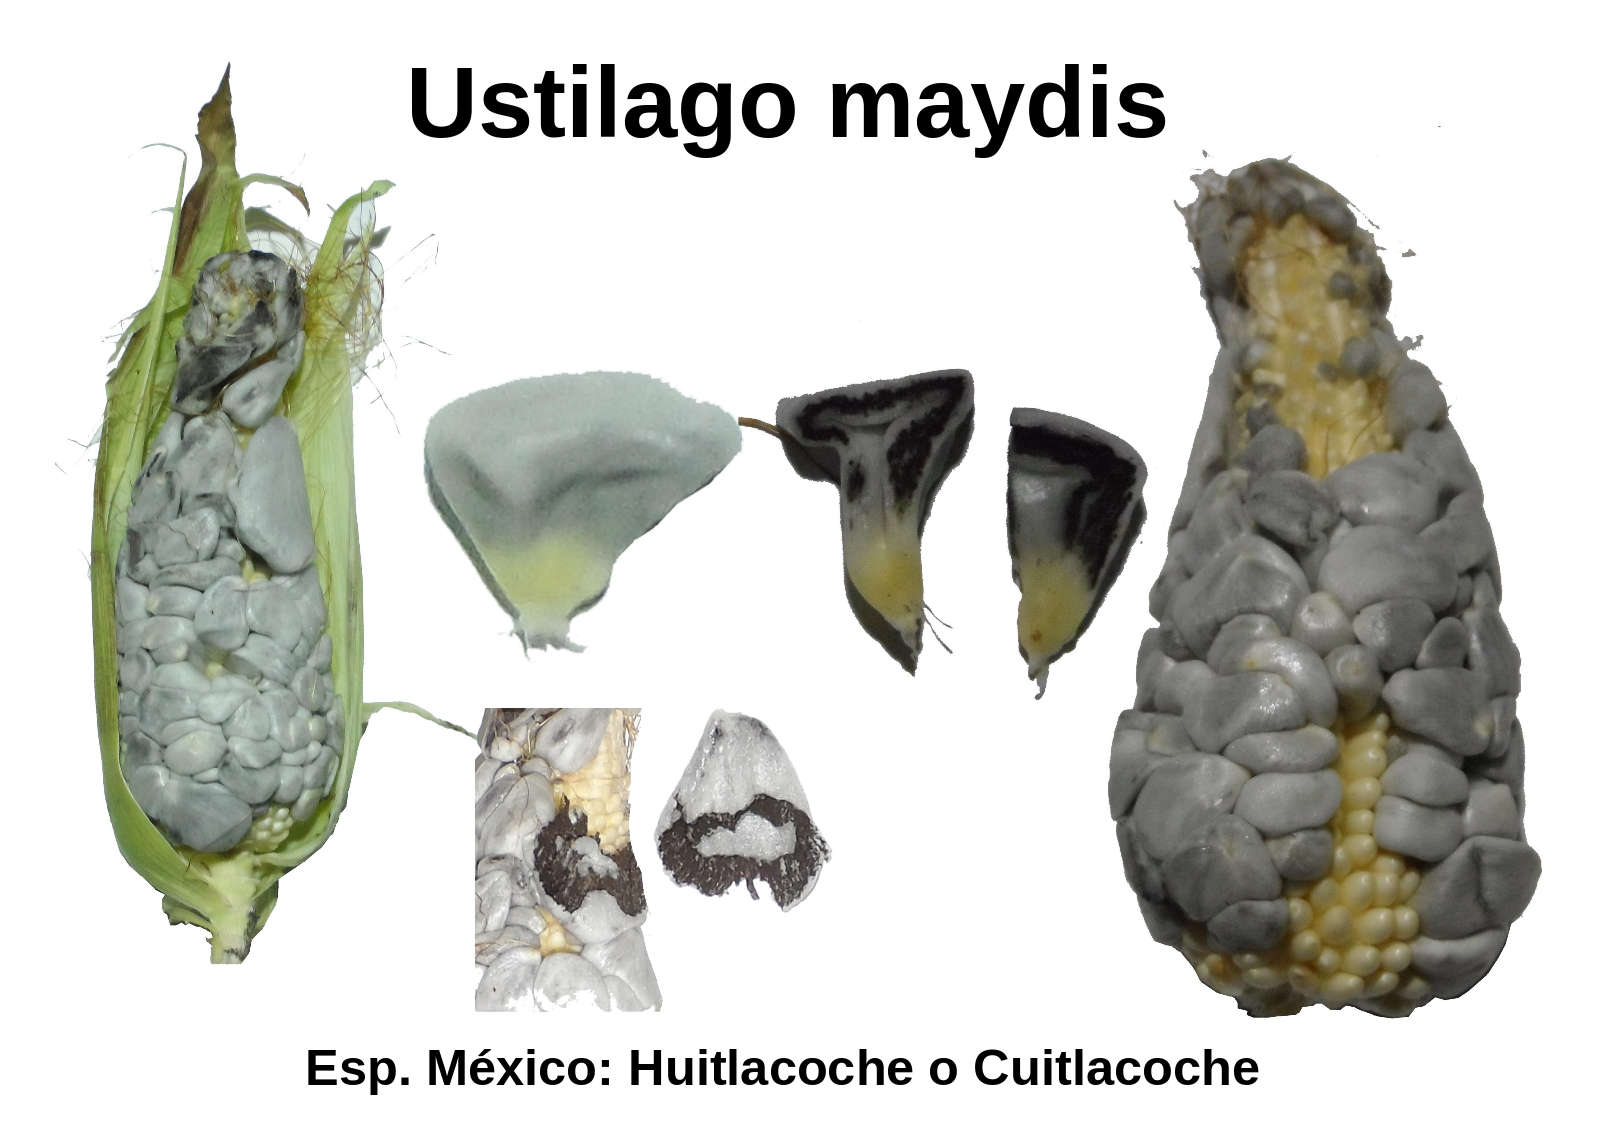 Sample of different aspects of a corn ear infected by the fungus Ustilago maydis, known in Mexico as Huitlacoche.